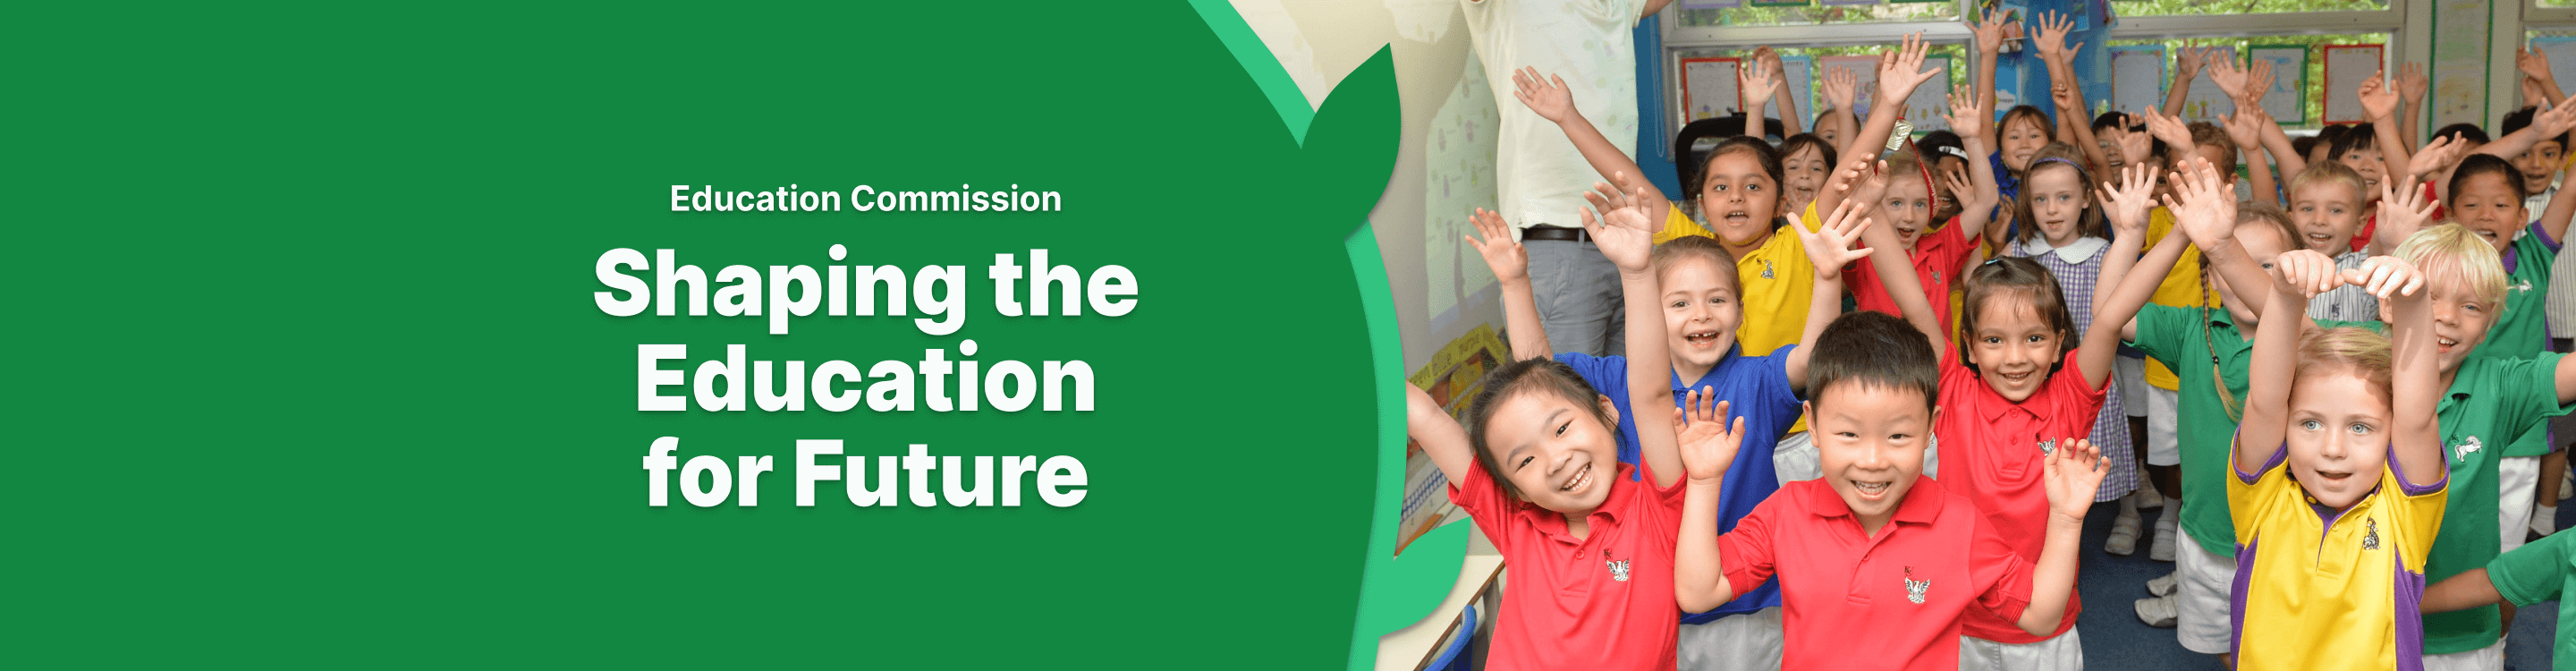 Shaping the Education for Future